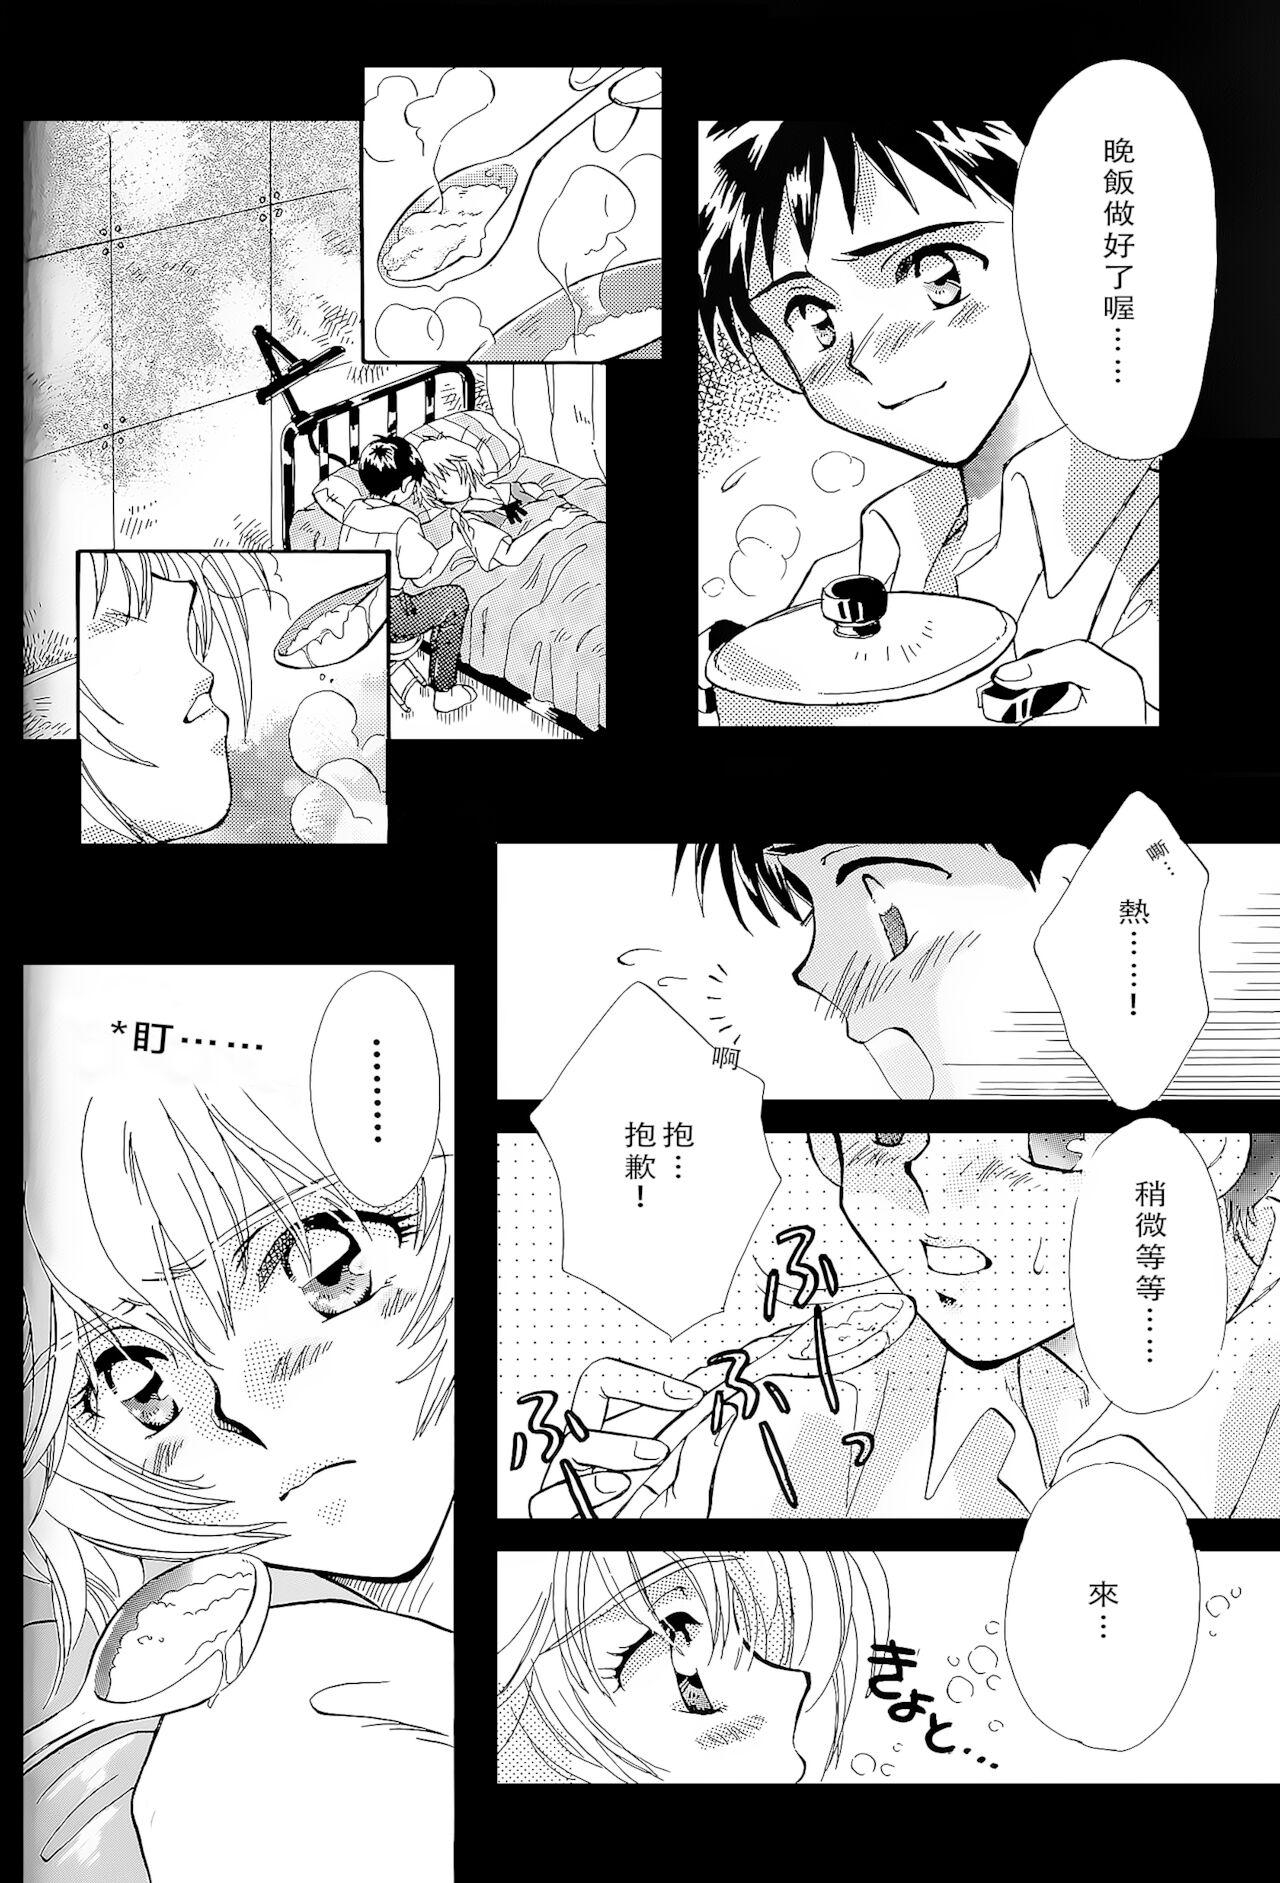 The PEPPY ANGEL episode0.1 - Neon genesis evangelion Pure 18 - Page 9